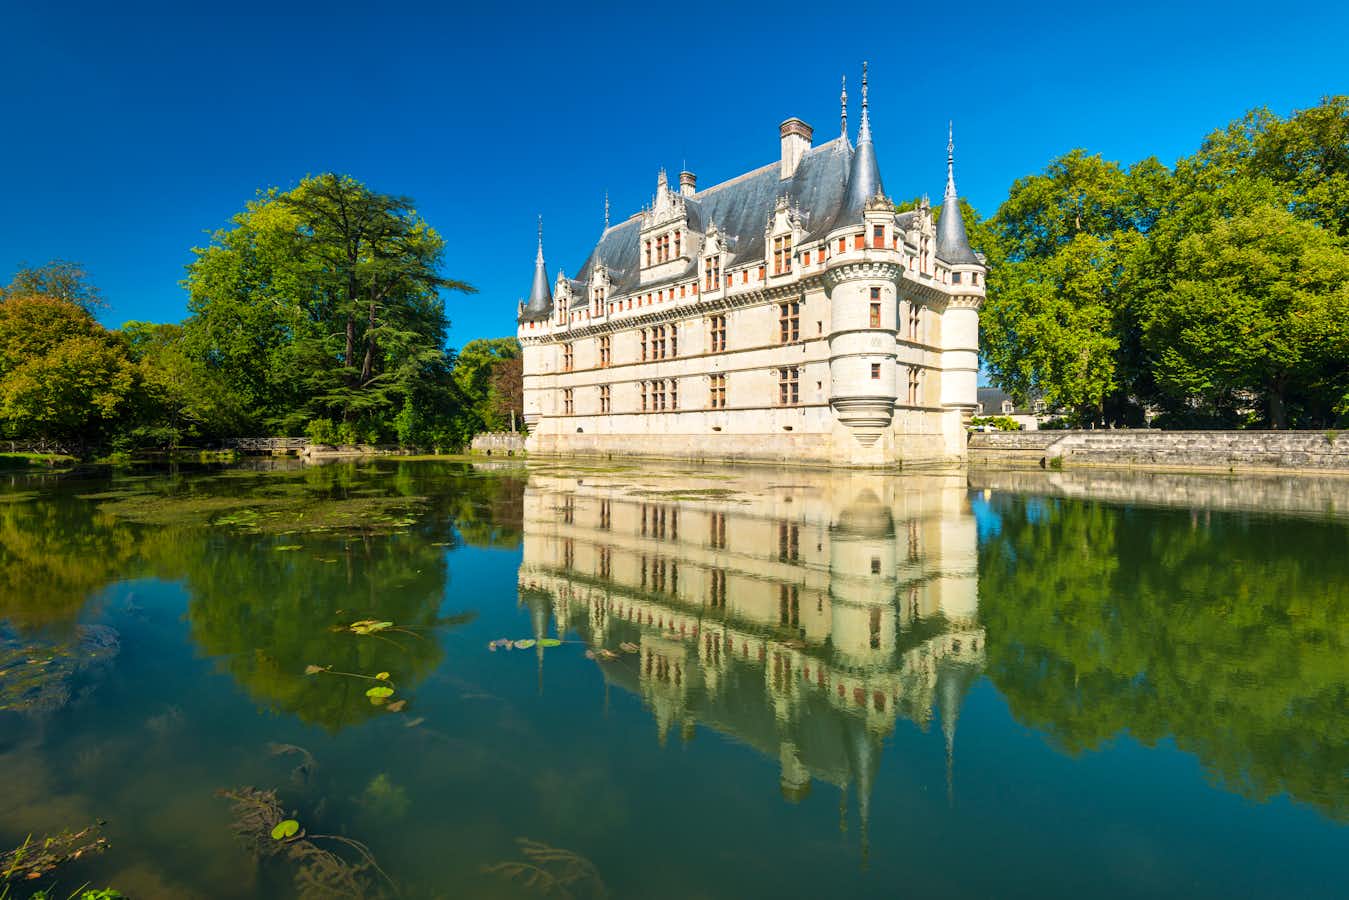 Cruising the Landscapes & the Châteaux of the Loire Valley